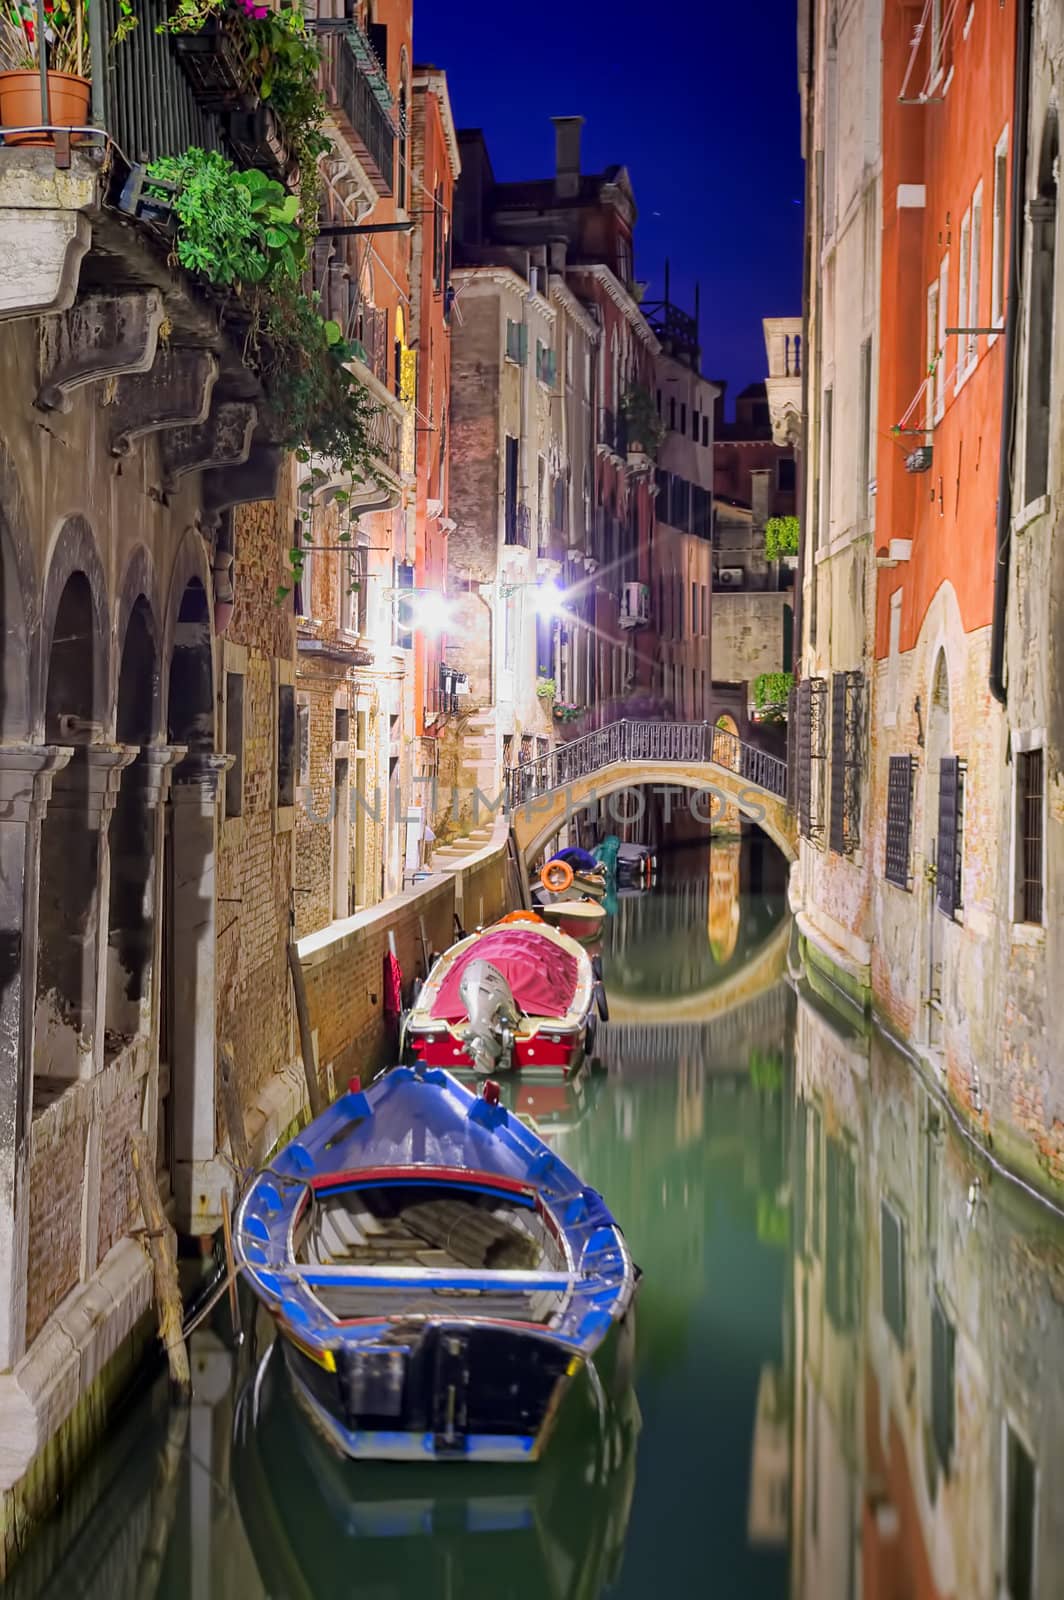 boats and water near buildings of Venice, Italy. Night scene